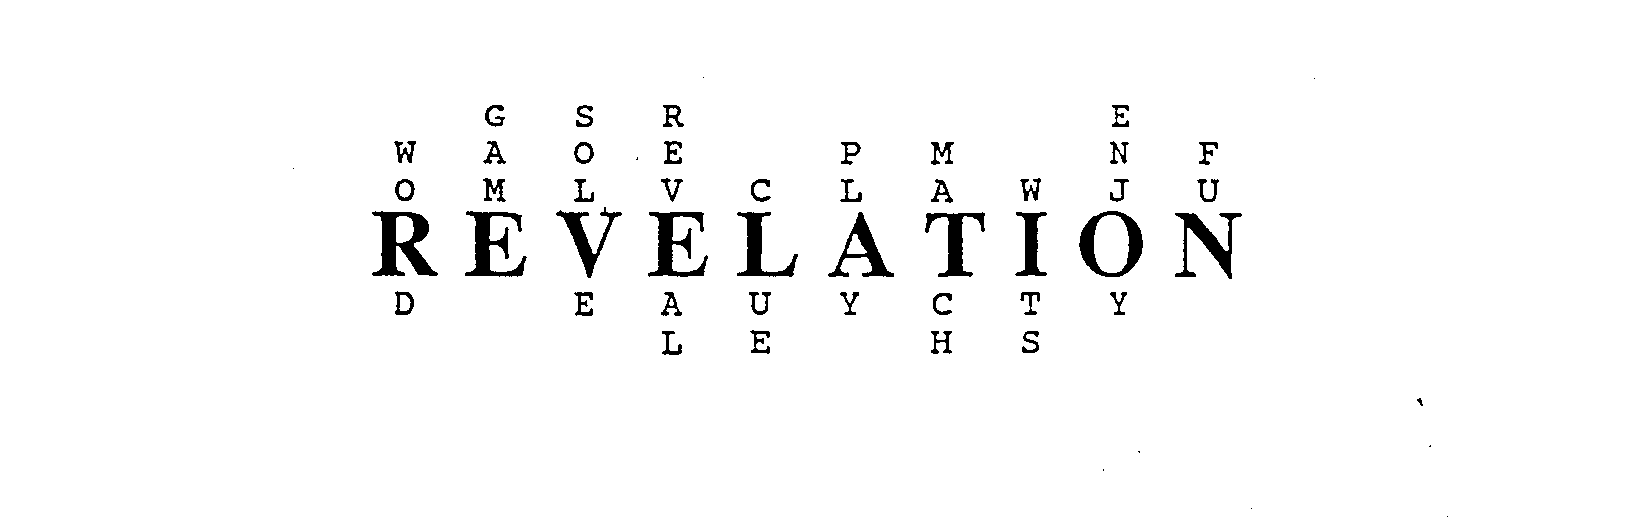  REVELATION WORD GAME SOLVE REVEAL CLUE PLAY MATCH WITS ENJOY FUN